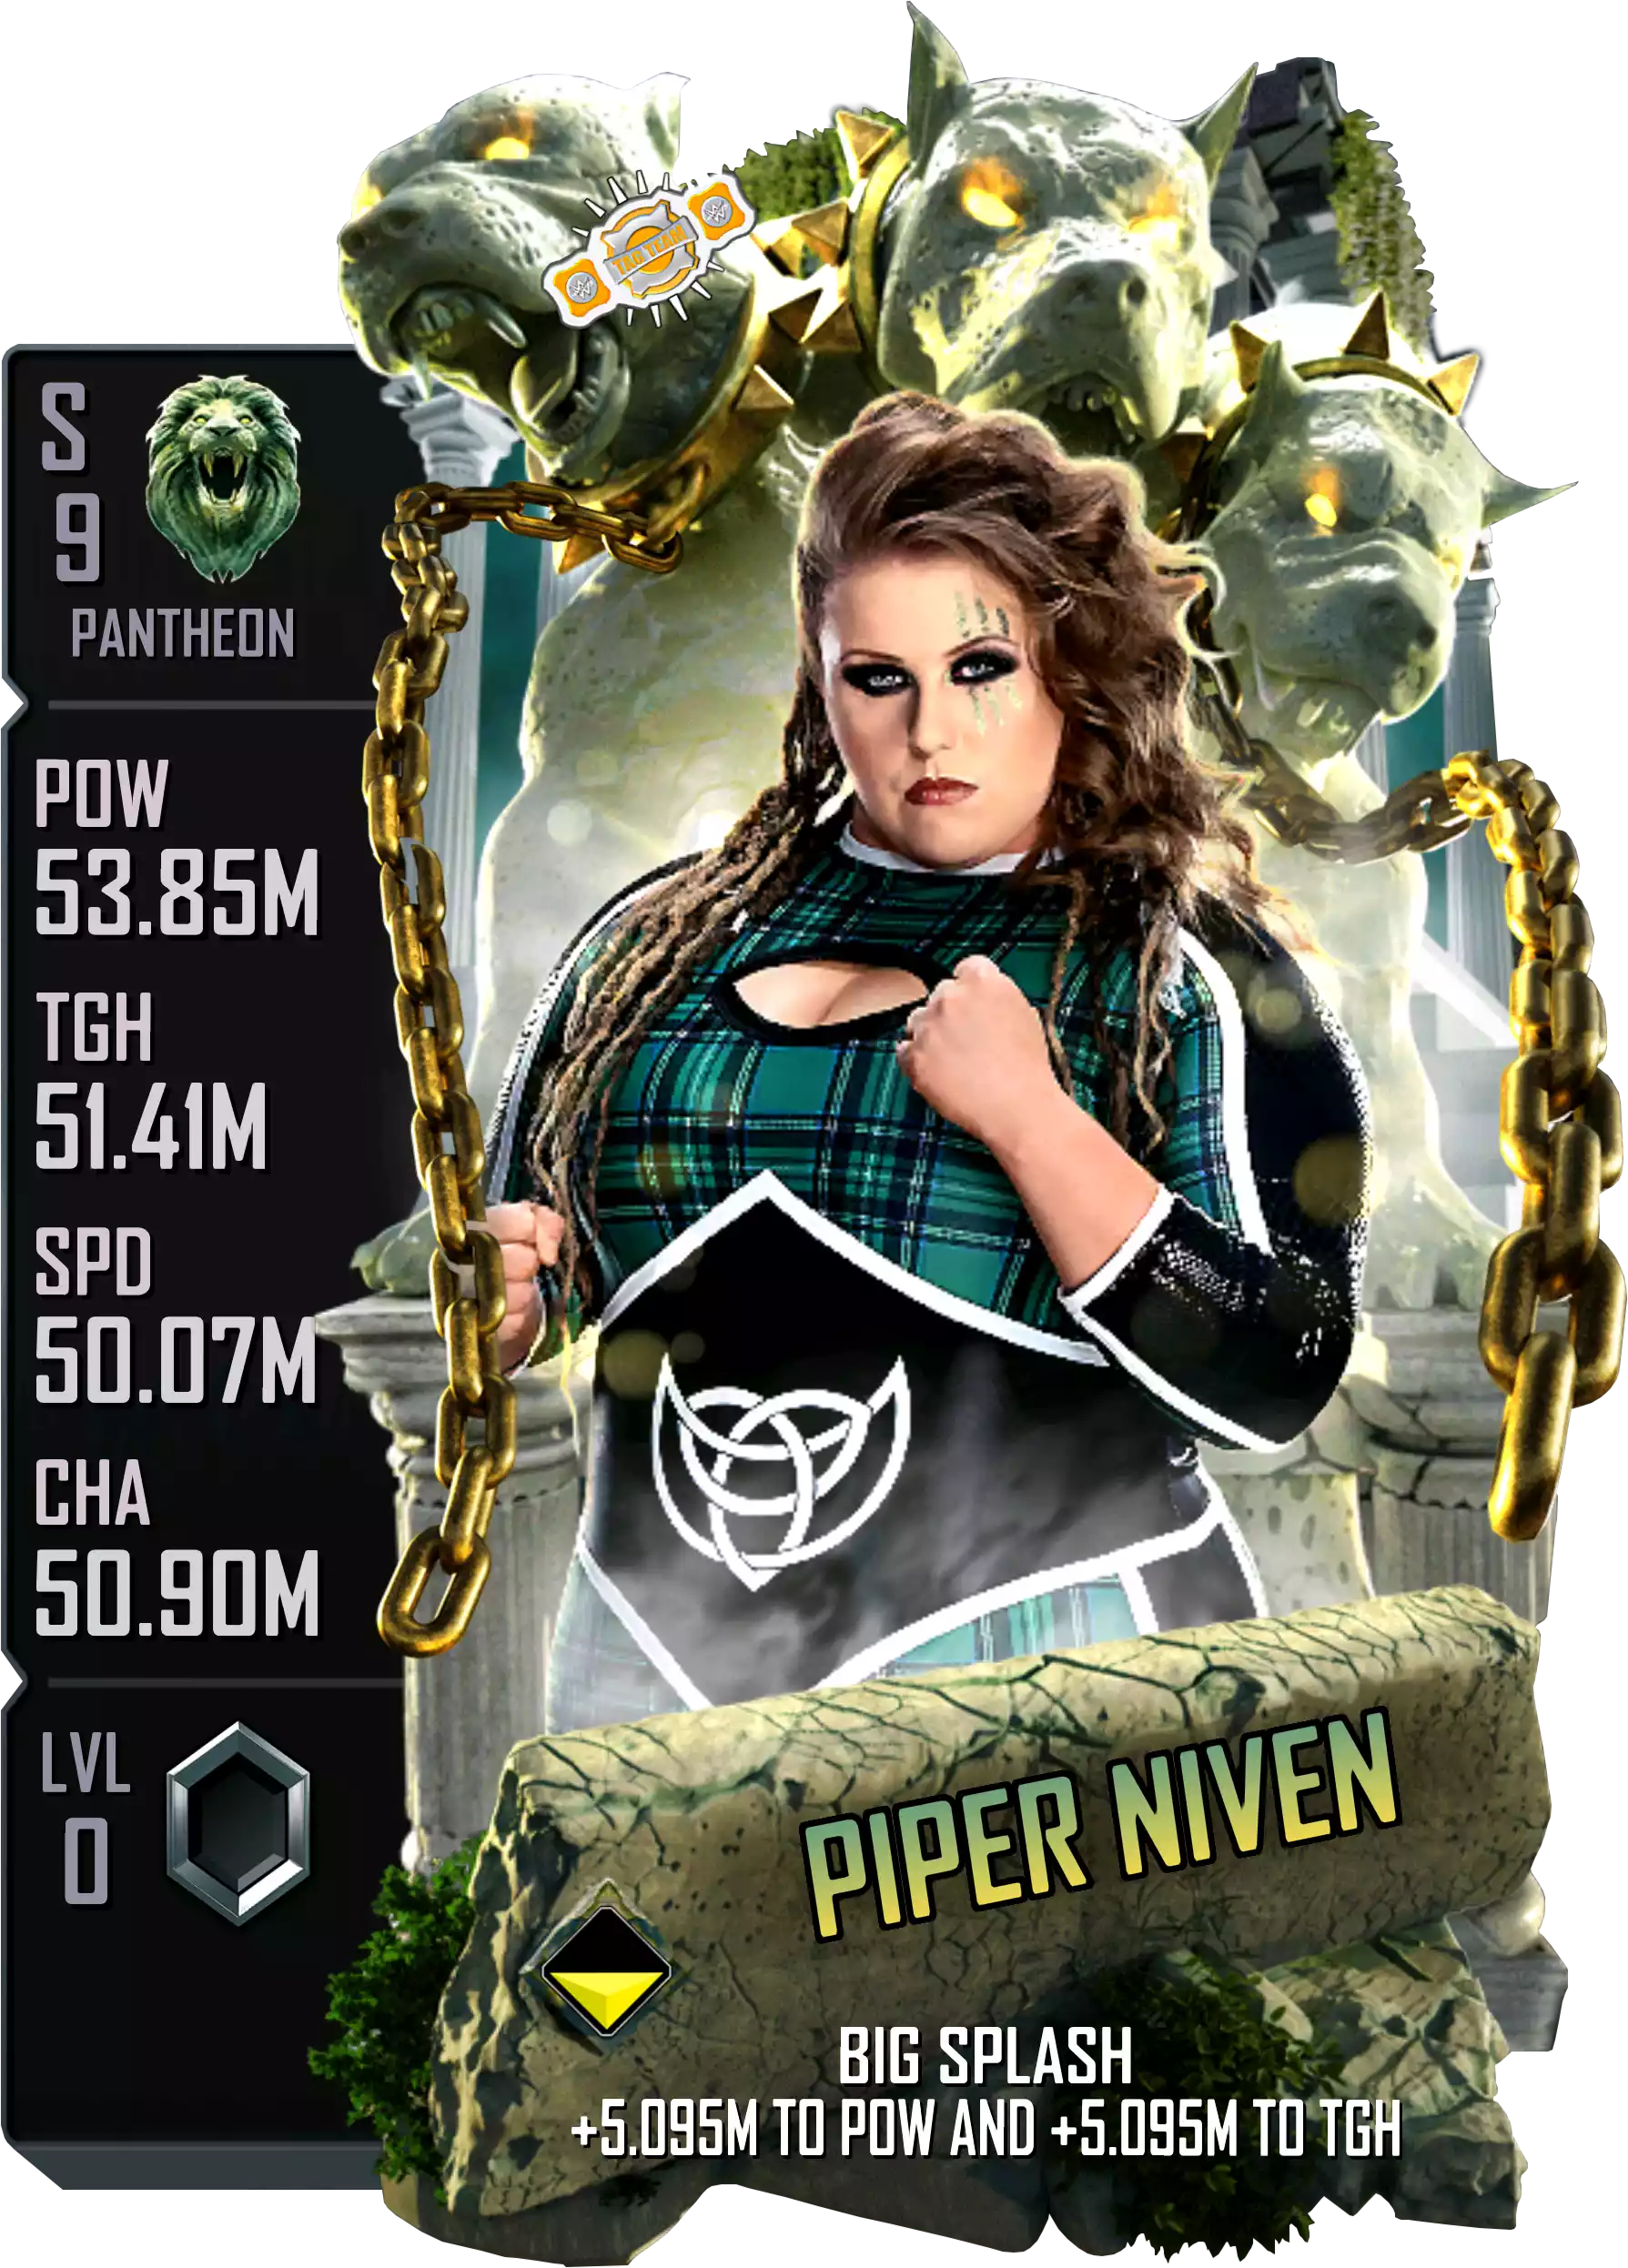 Pantheon, Piper Niven, Fusion Card from WWE Supercard